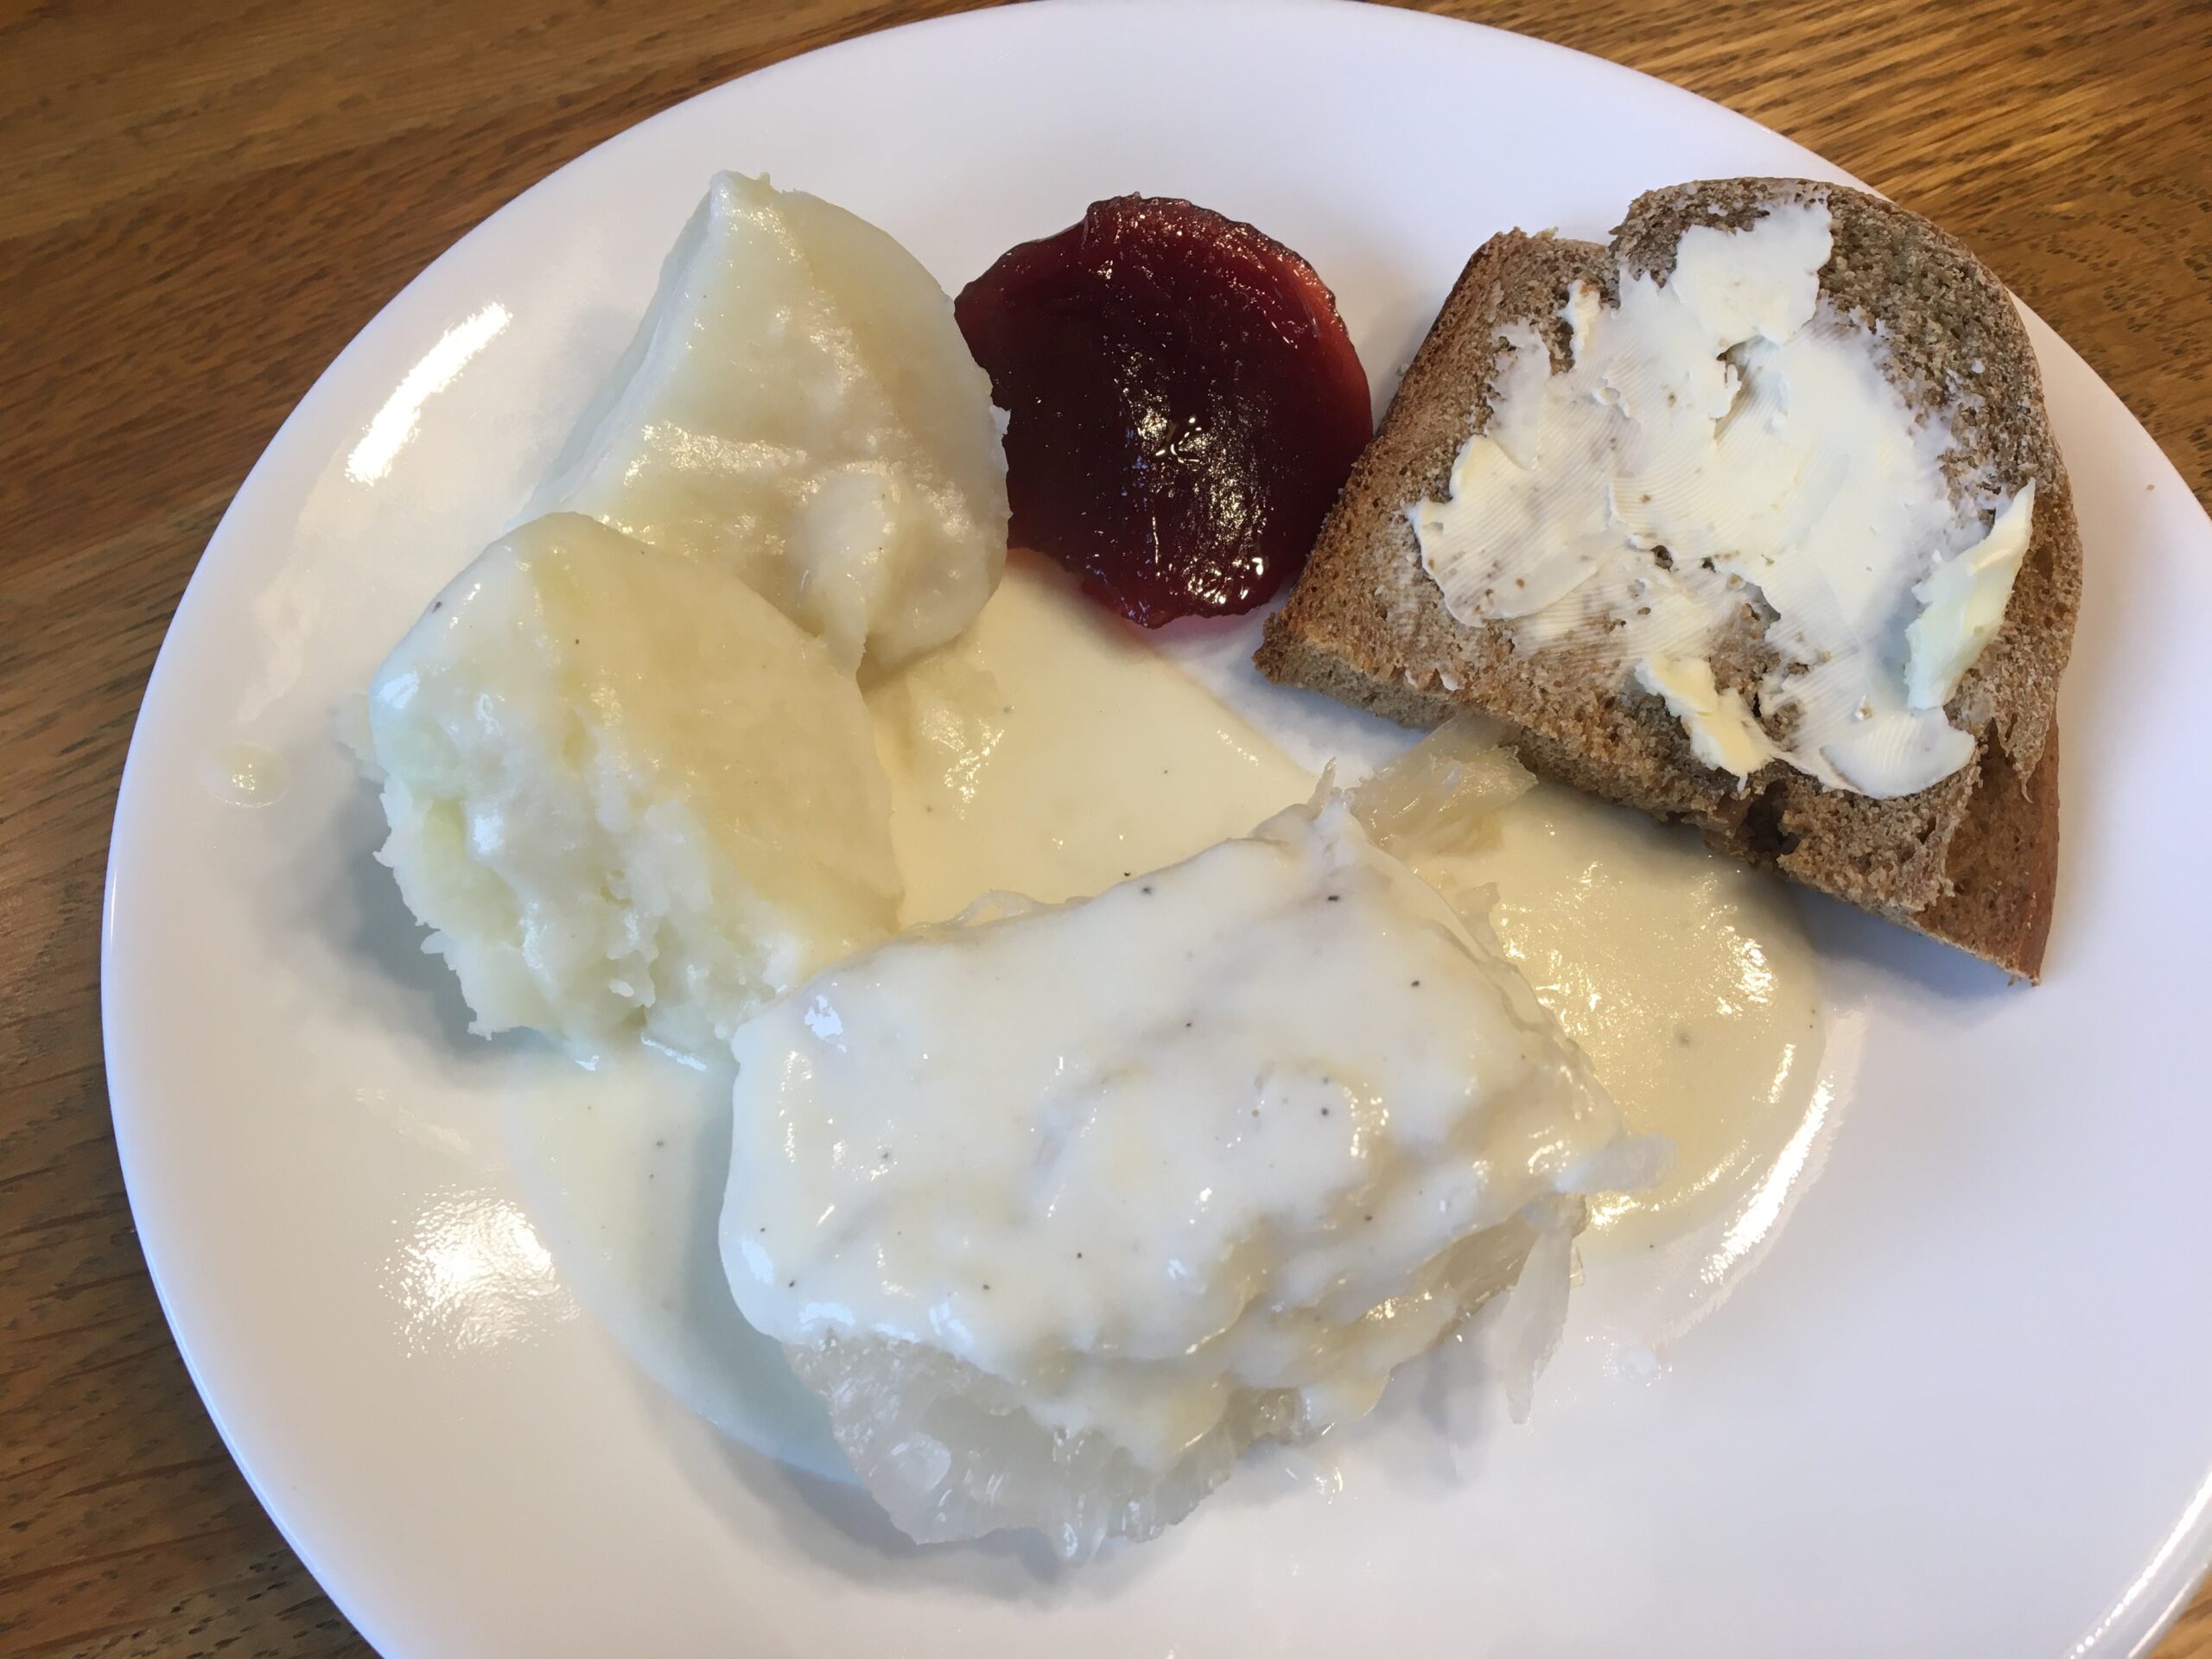 Lutefisk, potatoes in cream sauce paired with cranberry jelly and rye bread.